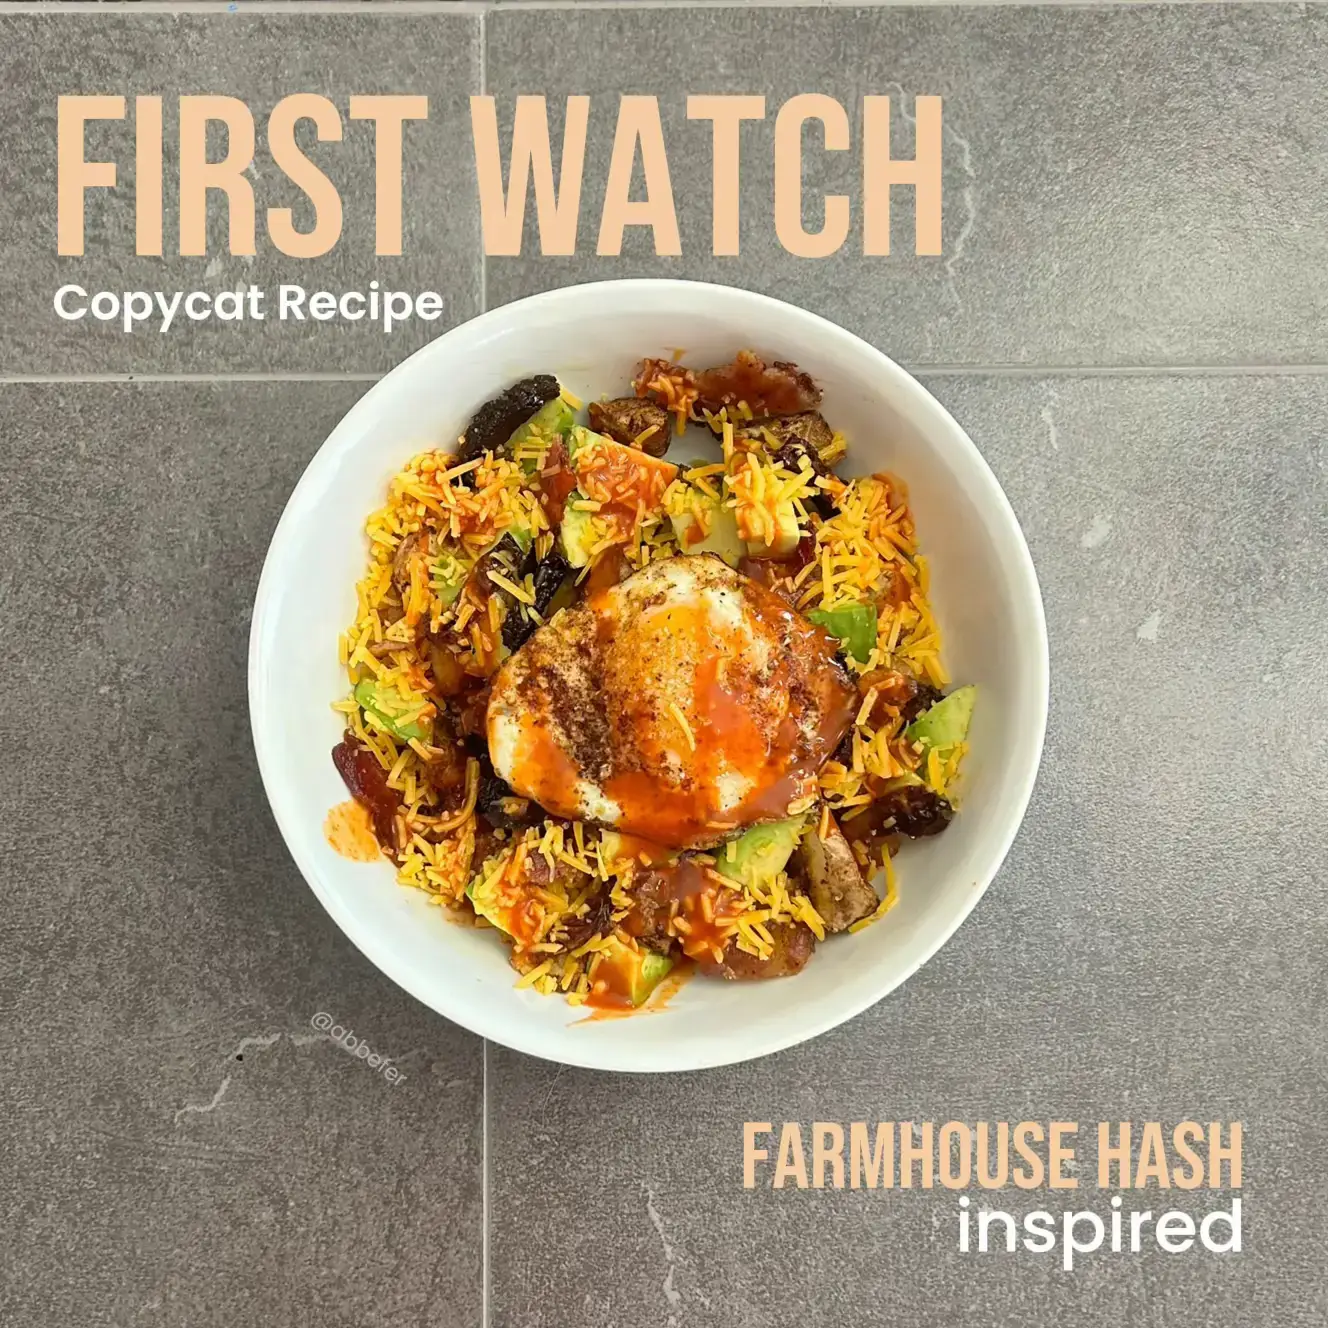 First Watch Farmhouse Hash Copycat Recipe's images